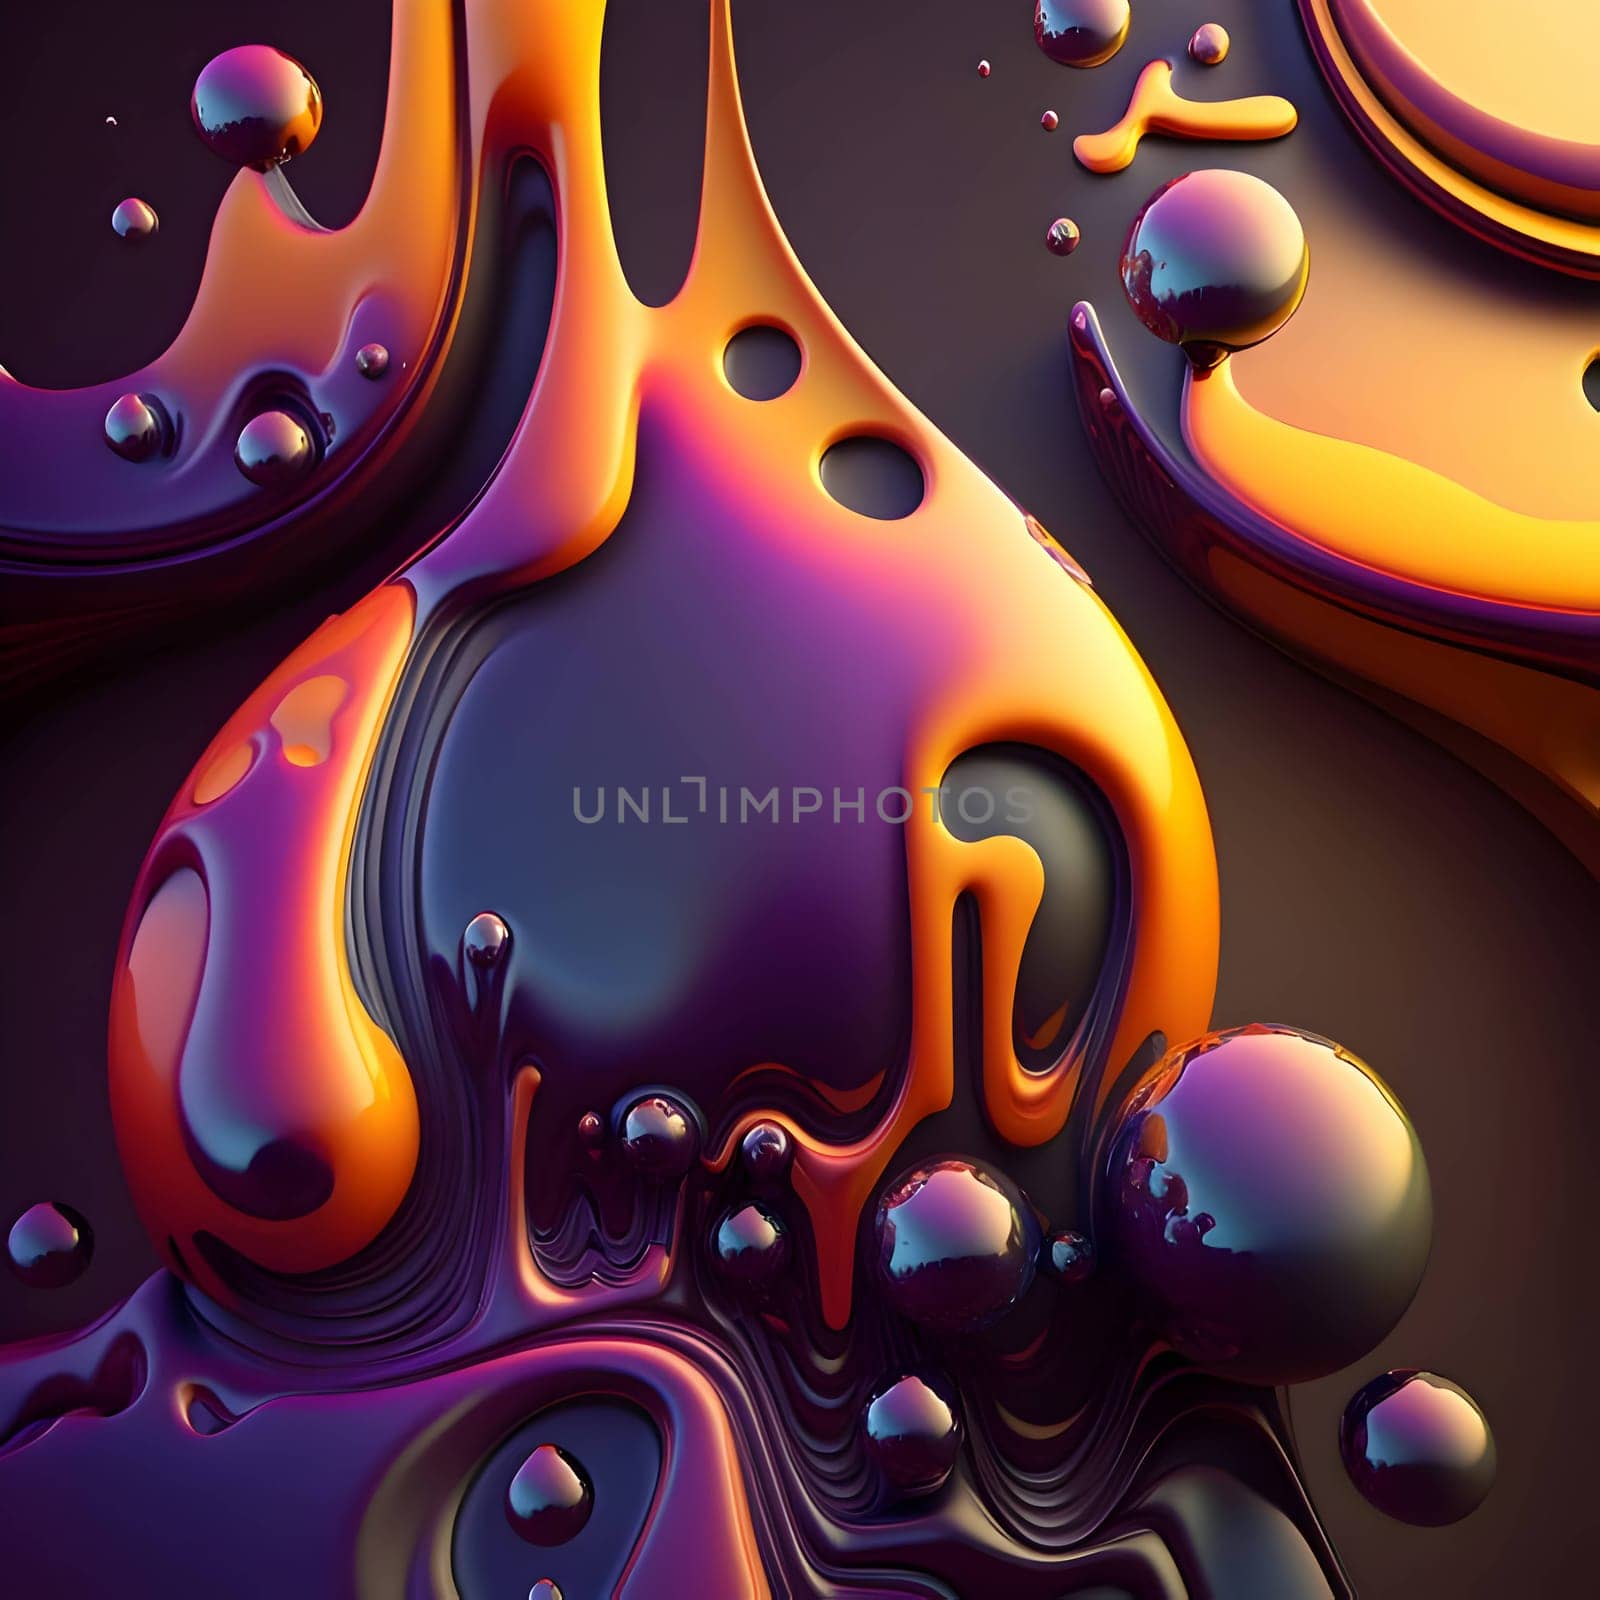 3D featuring liquid stkires and patterns creative and dynamic design as abstract background wallpaper. by ThemesS